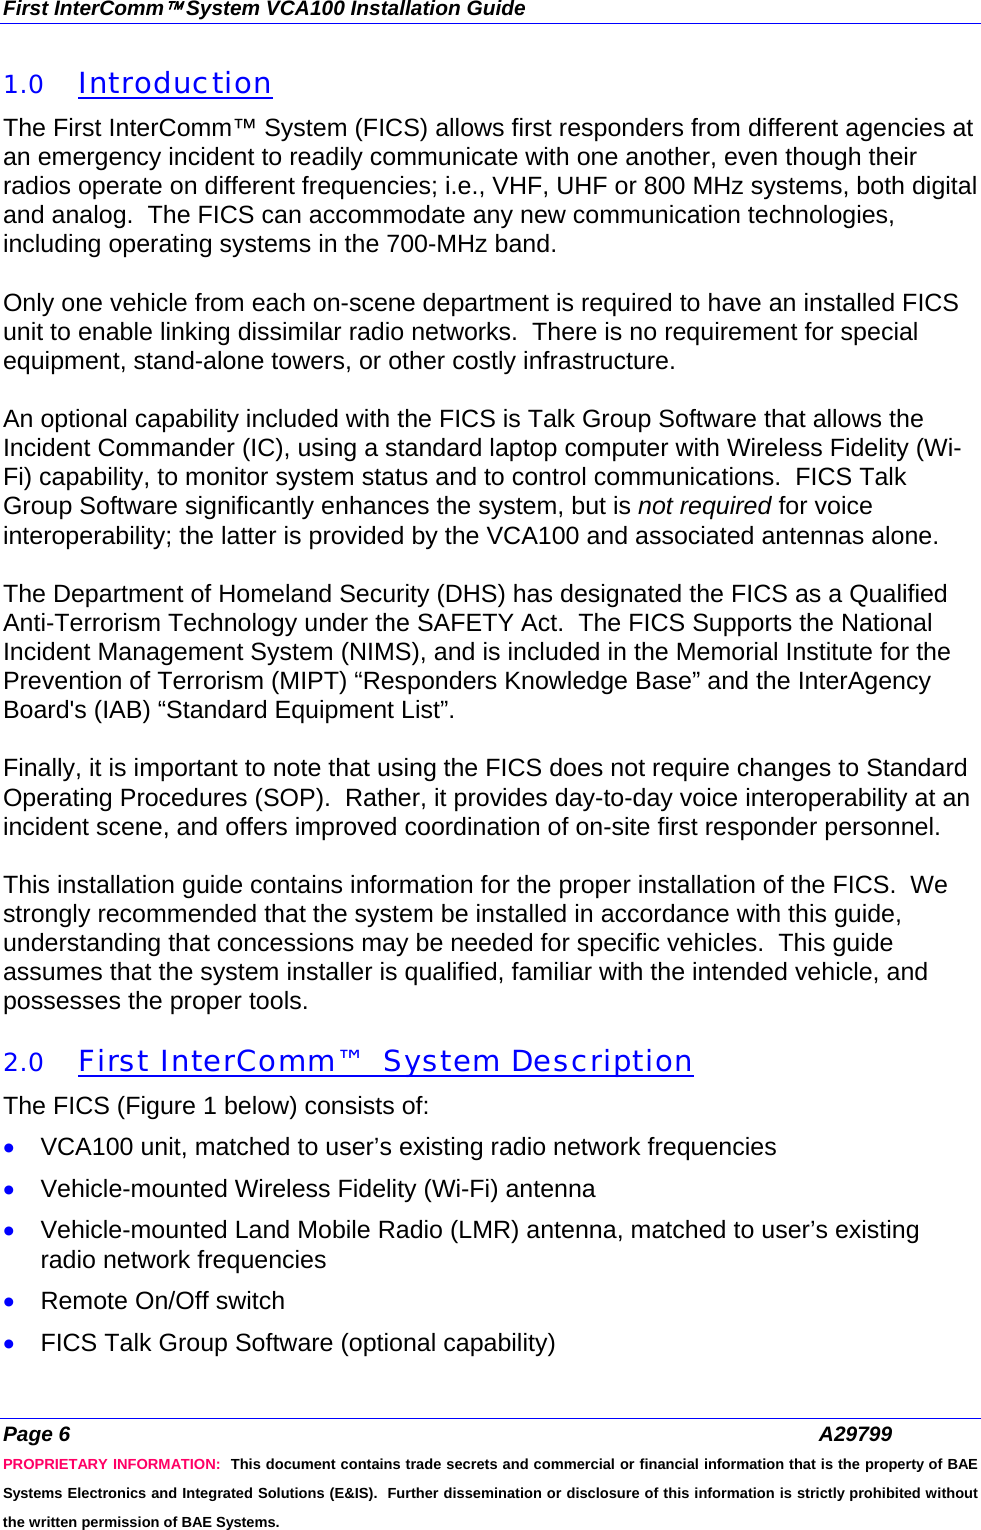 First InterComm™ System VCA100 Installation Guide Page 6  A29799 PROPRIETARY INFORMATION:  This document contains trade secrets and commercial or financial information that is the property of BAE Systems Electronics and Integrated Solutions (E&amp;IS).  Further dissemination or disclosure of this information is strictly prohibited without the written permission of BAE Systems. 1.0 Introduction The First InterComm™ System (FICS) allows first responders from different agencies at an emergency incident to readily communicate with one another, even though their radios operate on different frequencies; i.e., VHF, UHF or 800 MHz systems, both digital and analog.  The FICS can accommodate any new communication technologies, including operating systems in the 700-MHz band.  Only one vehicle from each on-scene department is required to have an installed FICS unit to enable linking dissimilar radio networks.  There is no requirement for special equipment, stand-alone towers, or other costly infrastructure.  An optional capability included with the FICS is Talk Group Software that allows the Incident Commander (IC), using a standard laptop computer with Wireless Fidelity (Wi-Fi) capability, to monitor system status and to control communications.  FICS Talk Group Software significantly enhances the system, but is not required for voice interoperability; the latter is provided by the VCA100 and associated antennas alone.  The Department of Homeland Security (DHS) has designated the FICS as a Qualified Anti-Terrorism Technology under the SAFETY Act.  The FICS Supports the National Incident Management System (NIMS), and is included in the Memorial Institute for the Prevention of Terrorism (MIPT) “Responders Knowledge Base” and the InterAgency Board&apos;s (IAB) “Standard Equipment List”.  Finally, it is important to note that using the FICS does not require changes to Standard Operating Procedures (SOP).  Rather, it provides day-to-day voice interoperability at an incident scene, and offers improved coordination of on-site first responder personnel.  This installation guide contains information for the proper installation of the FICS.  We strongly recommended that the system be installed in accordance with this guide, understanding that concessions may be needed for specific vehicles.  This guide assumes that the system installer is qualified, familiar with the intended vehicle, and possesses the proper tools.  2.0 First InterComm™  System Description The FICS (Figure 1 below) consists of: • VCA100 unit, matched to user’s existing radio network frequencies • Vehicle-mounted Wireless Fidelity (Wi-Fi) antenna • Vehicle-mounted Land Mobile Radio (LMR) antenna, matched to user’s existing radio network frequencies • Remote On/Off switch • FICS Talk Group Software (optional capability) 